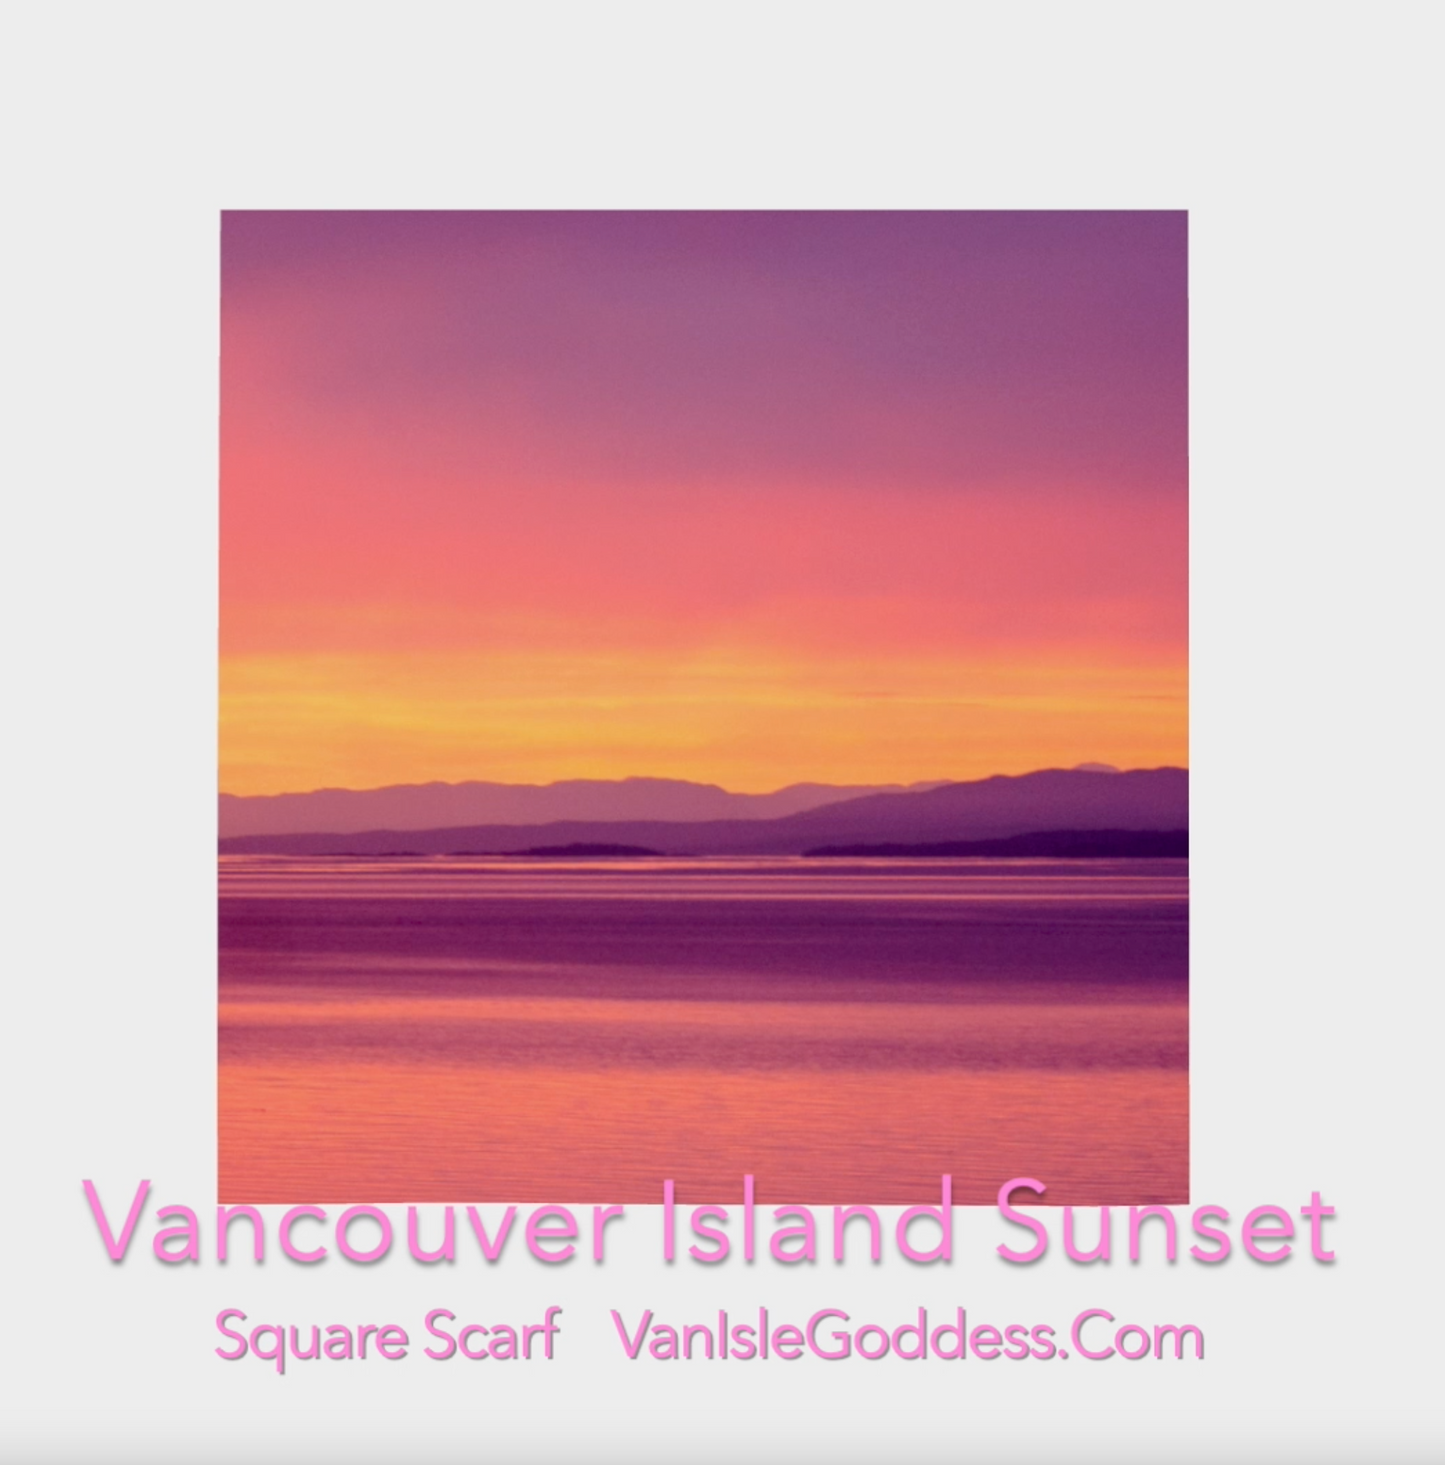 Vancouver Island Sunset square scarf shown full size